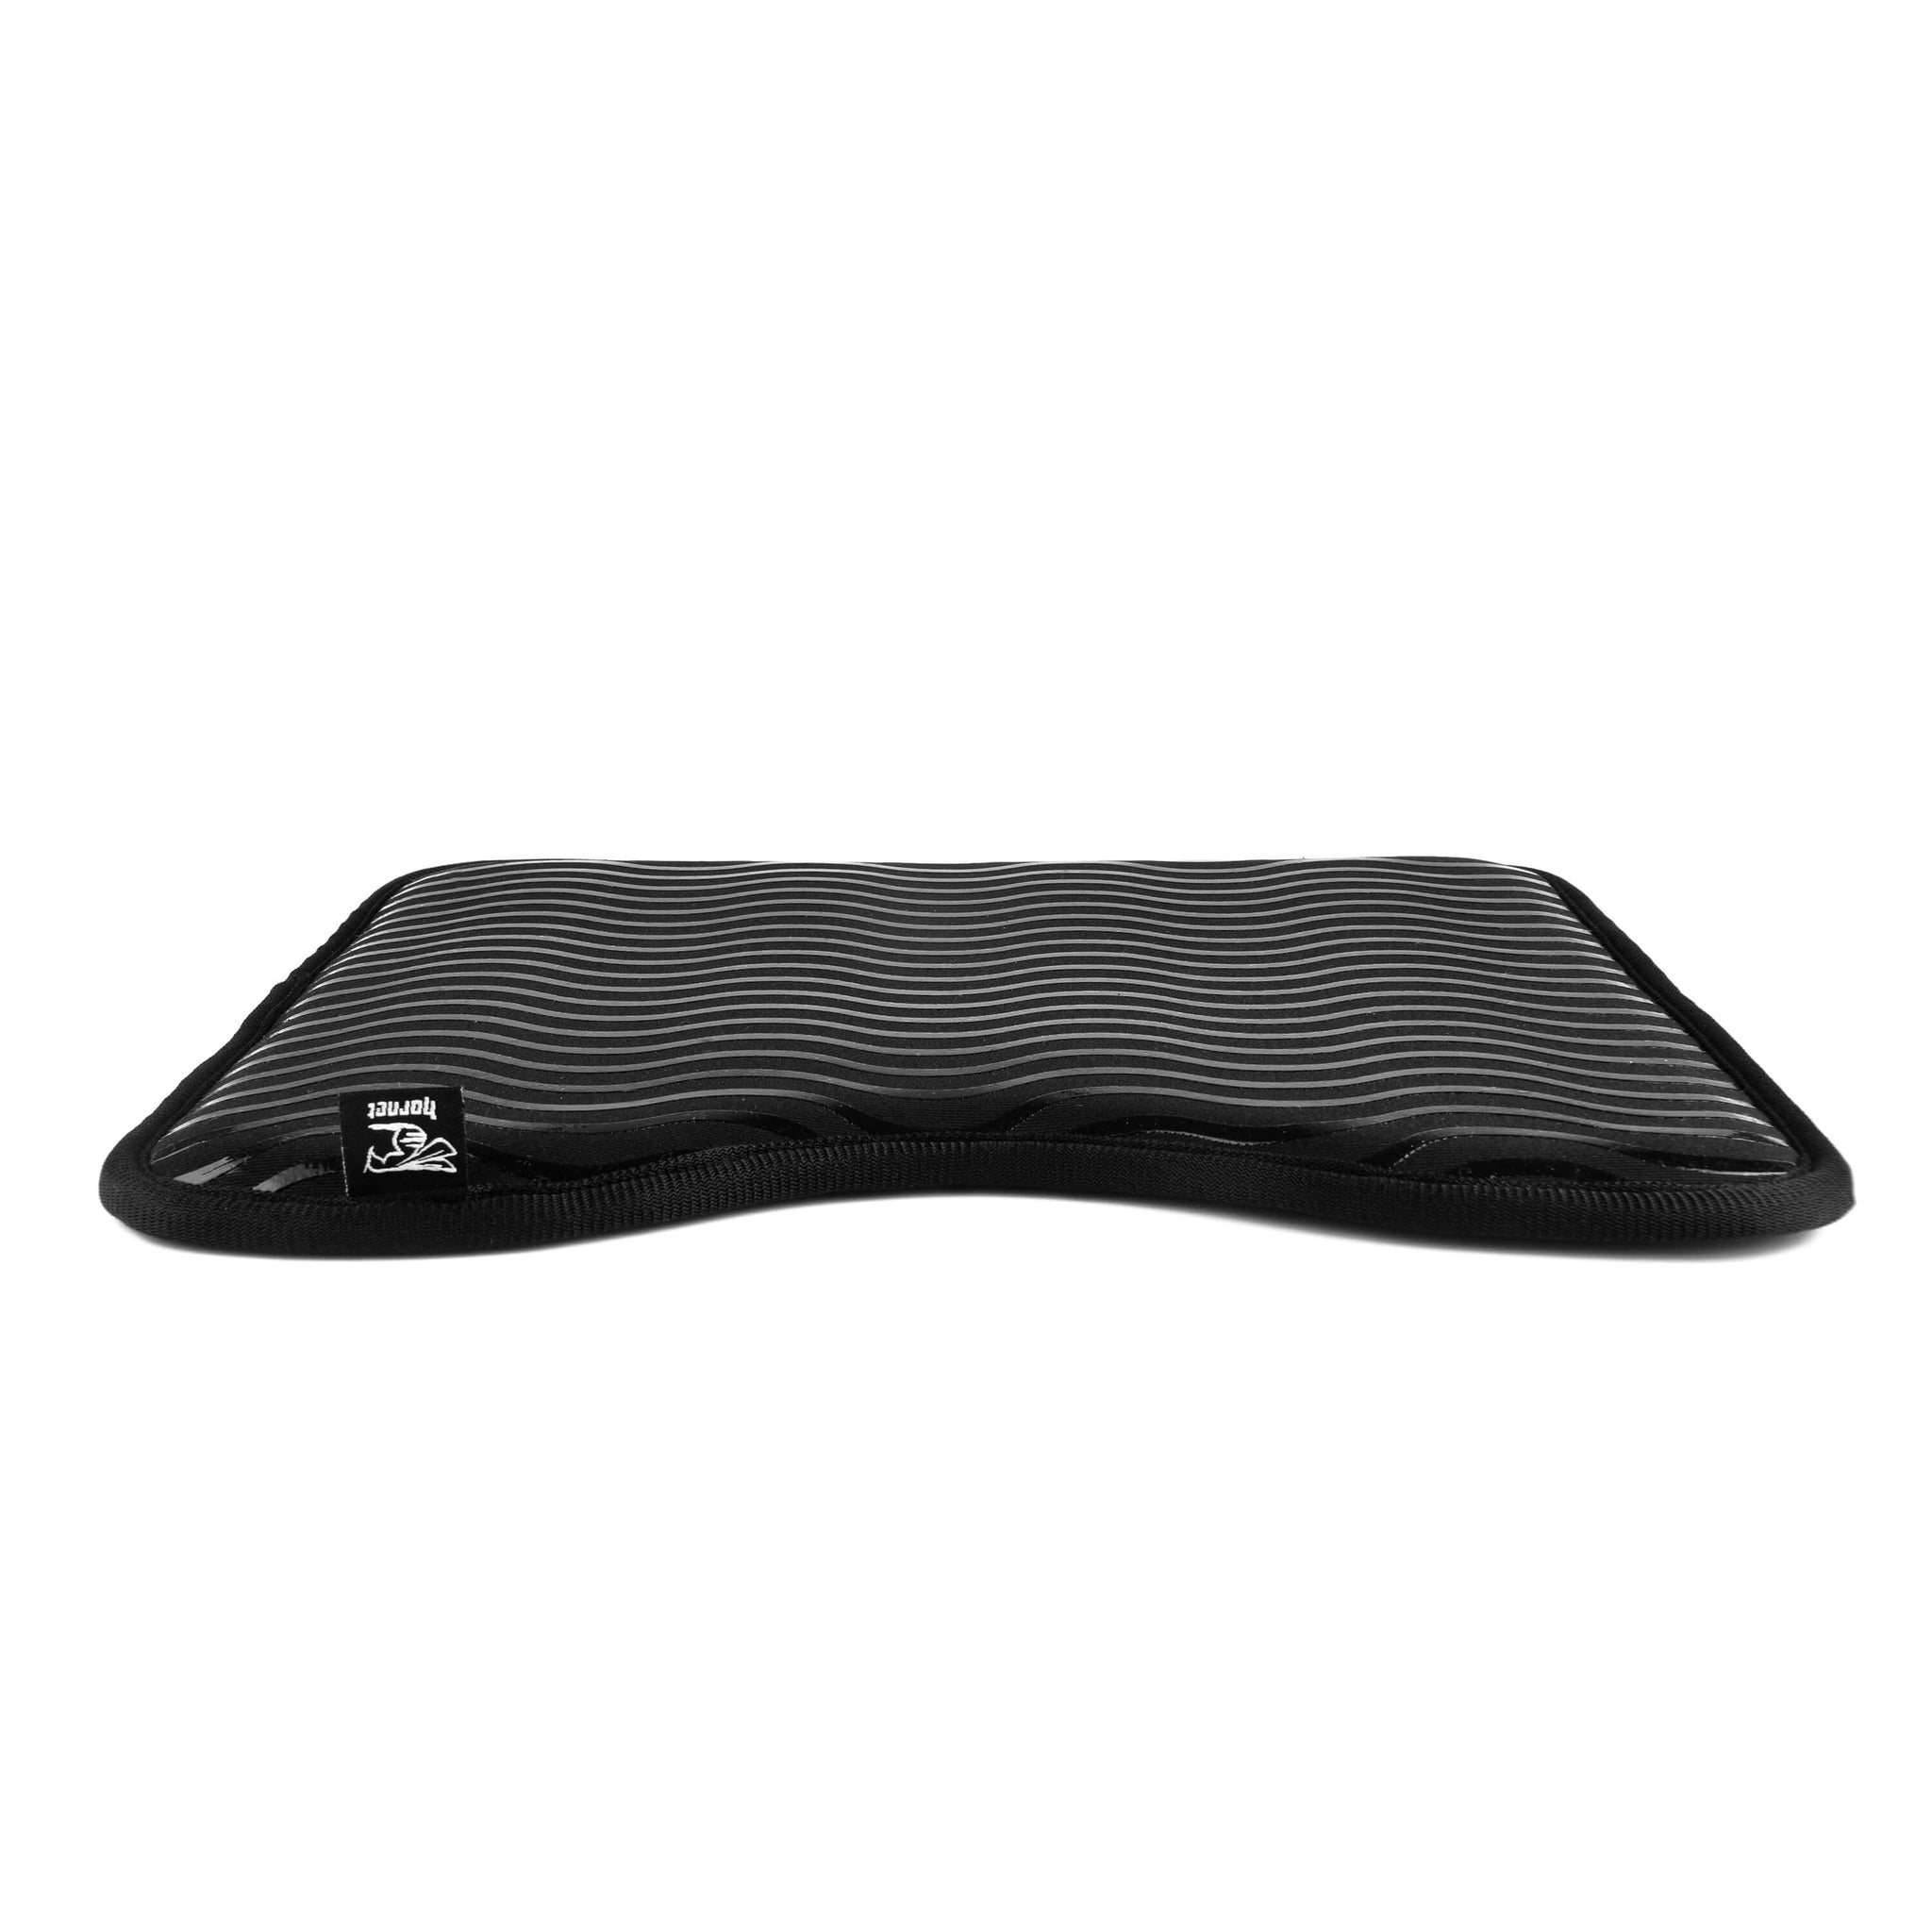 Rowing and Sculling Anti Slip Seat Pad - Anti-slip and Increases Comfort - Hornet Watersports